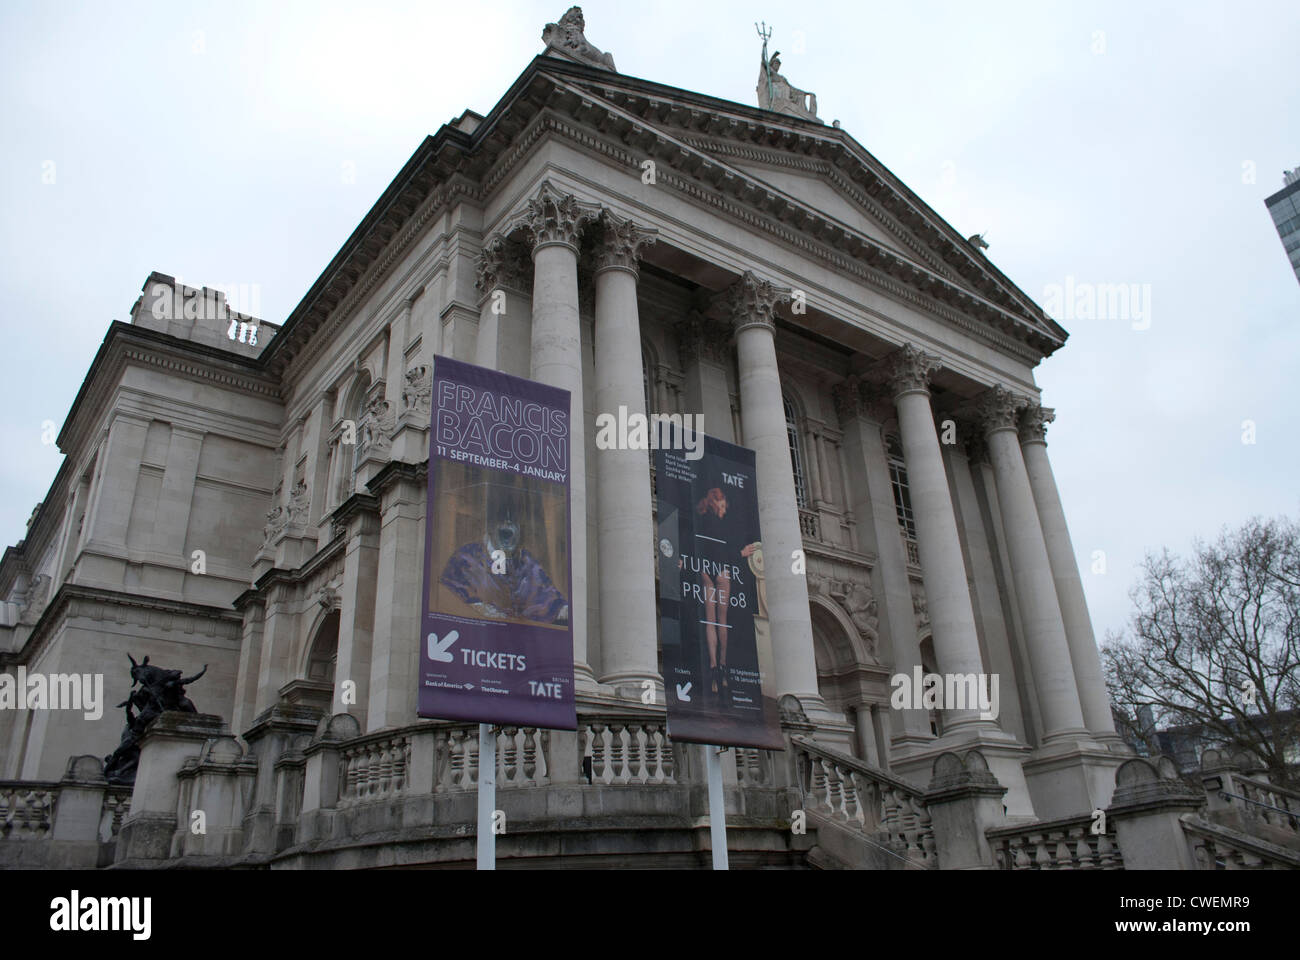 The front of Tate Britain art gallery with sign for Francis Bacon exhibition Stock Photo